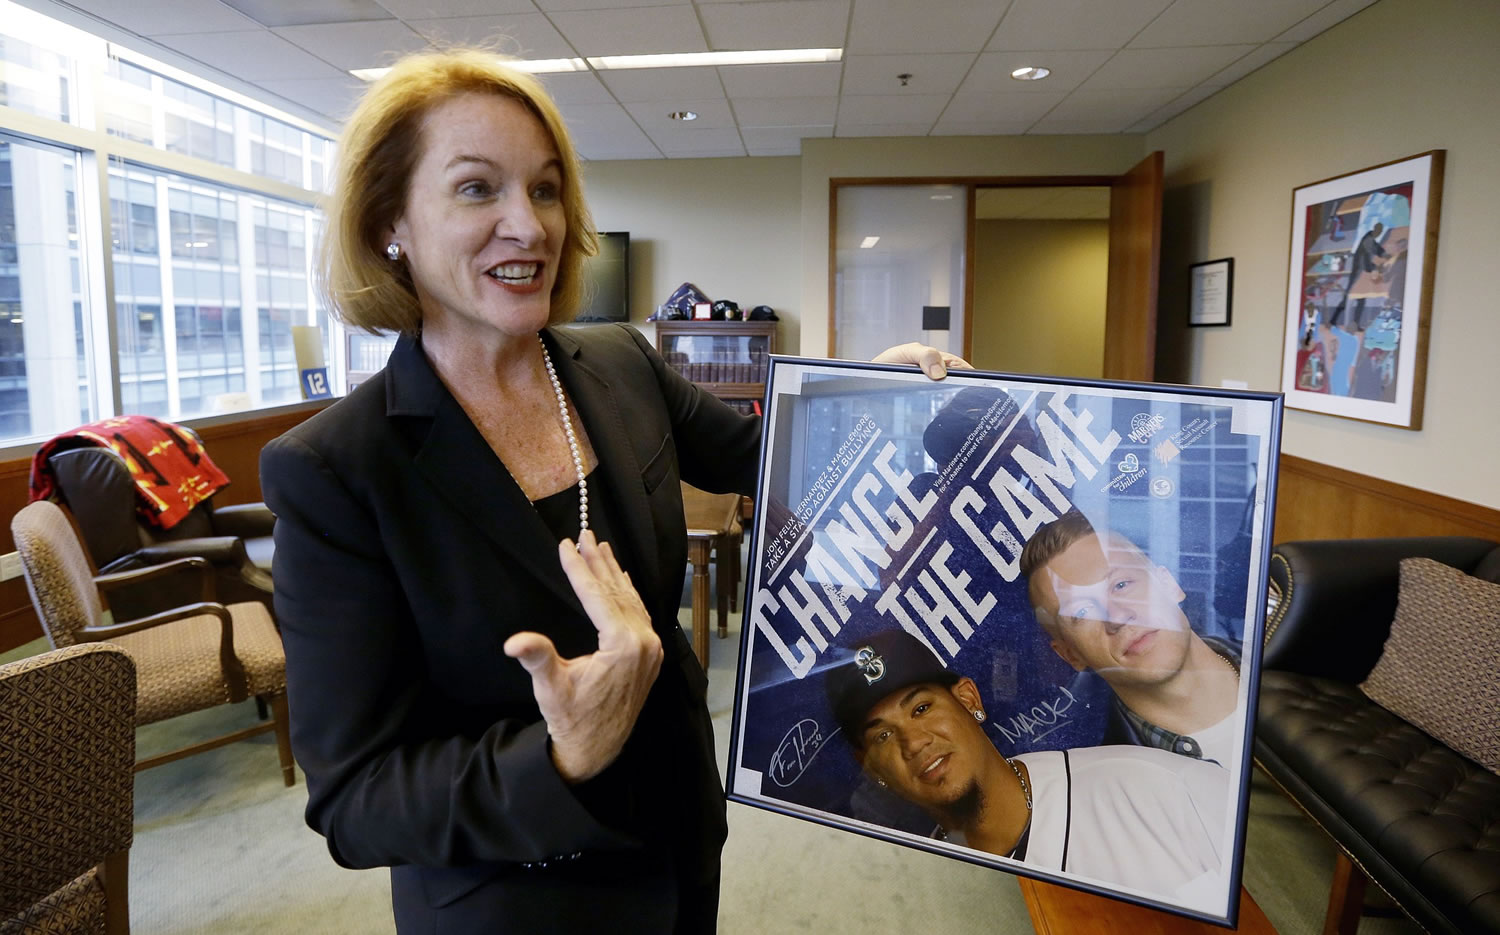 U.S Attorney for Western Washington Jenny Durkan holds memorabilia from an anti-bullying event she helped organize with the Seattle Mariners and rapper Macklemore as she stands in her office Sept. 29 in Seattle.